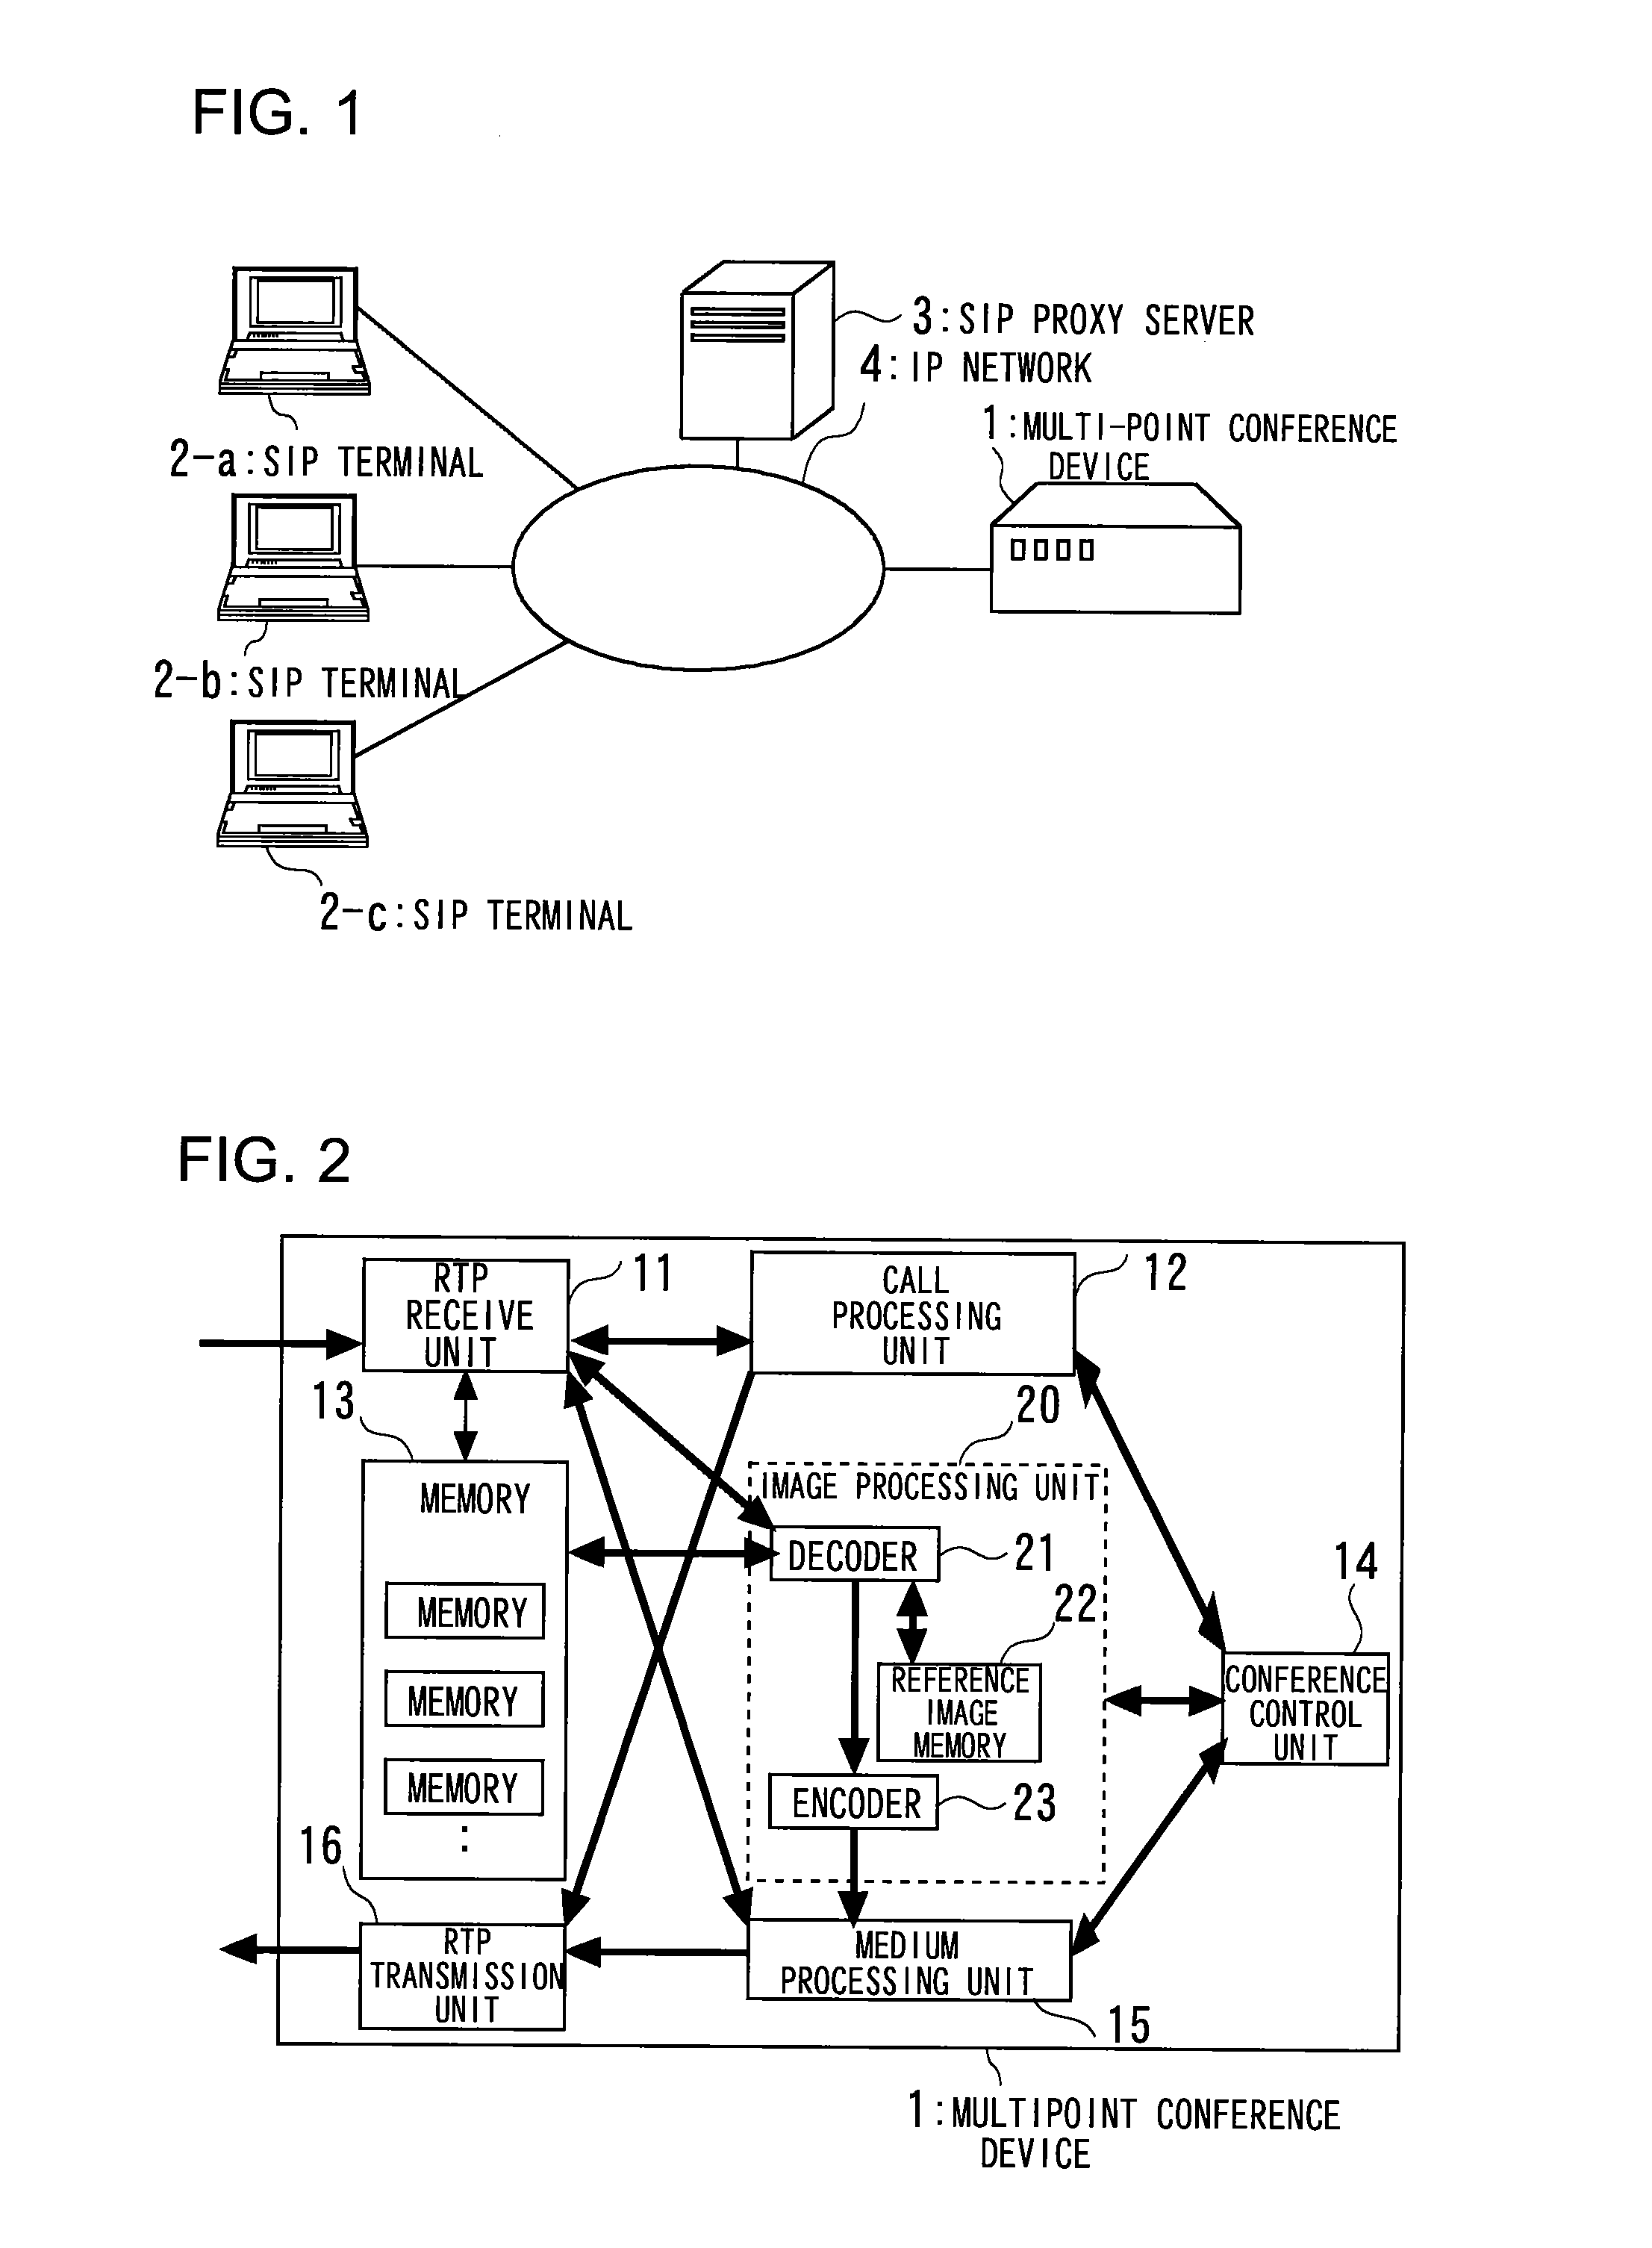 Multi-Point Conference System and Multi-Point Conference Device